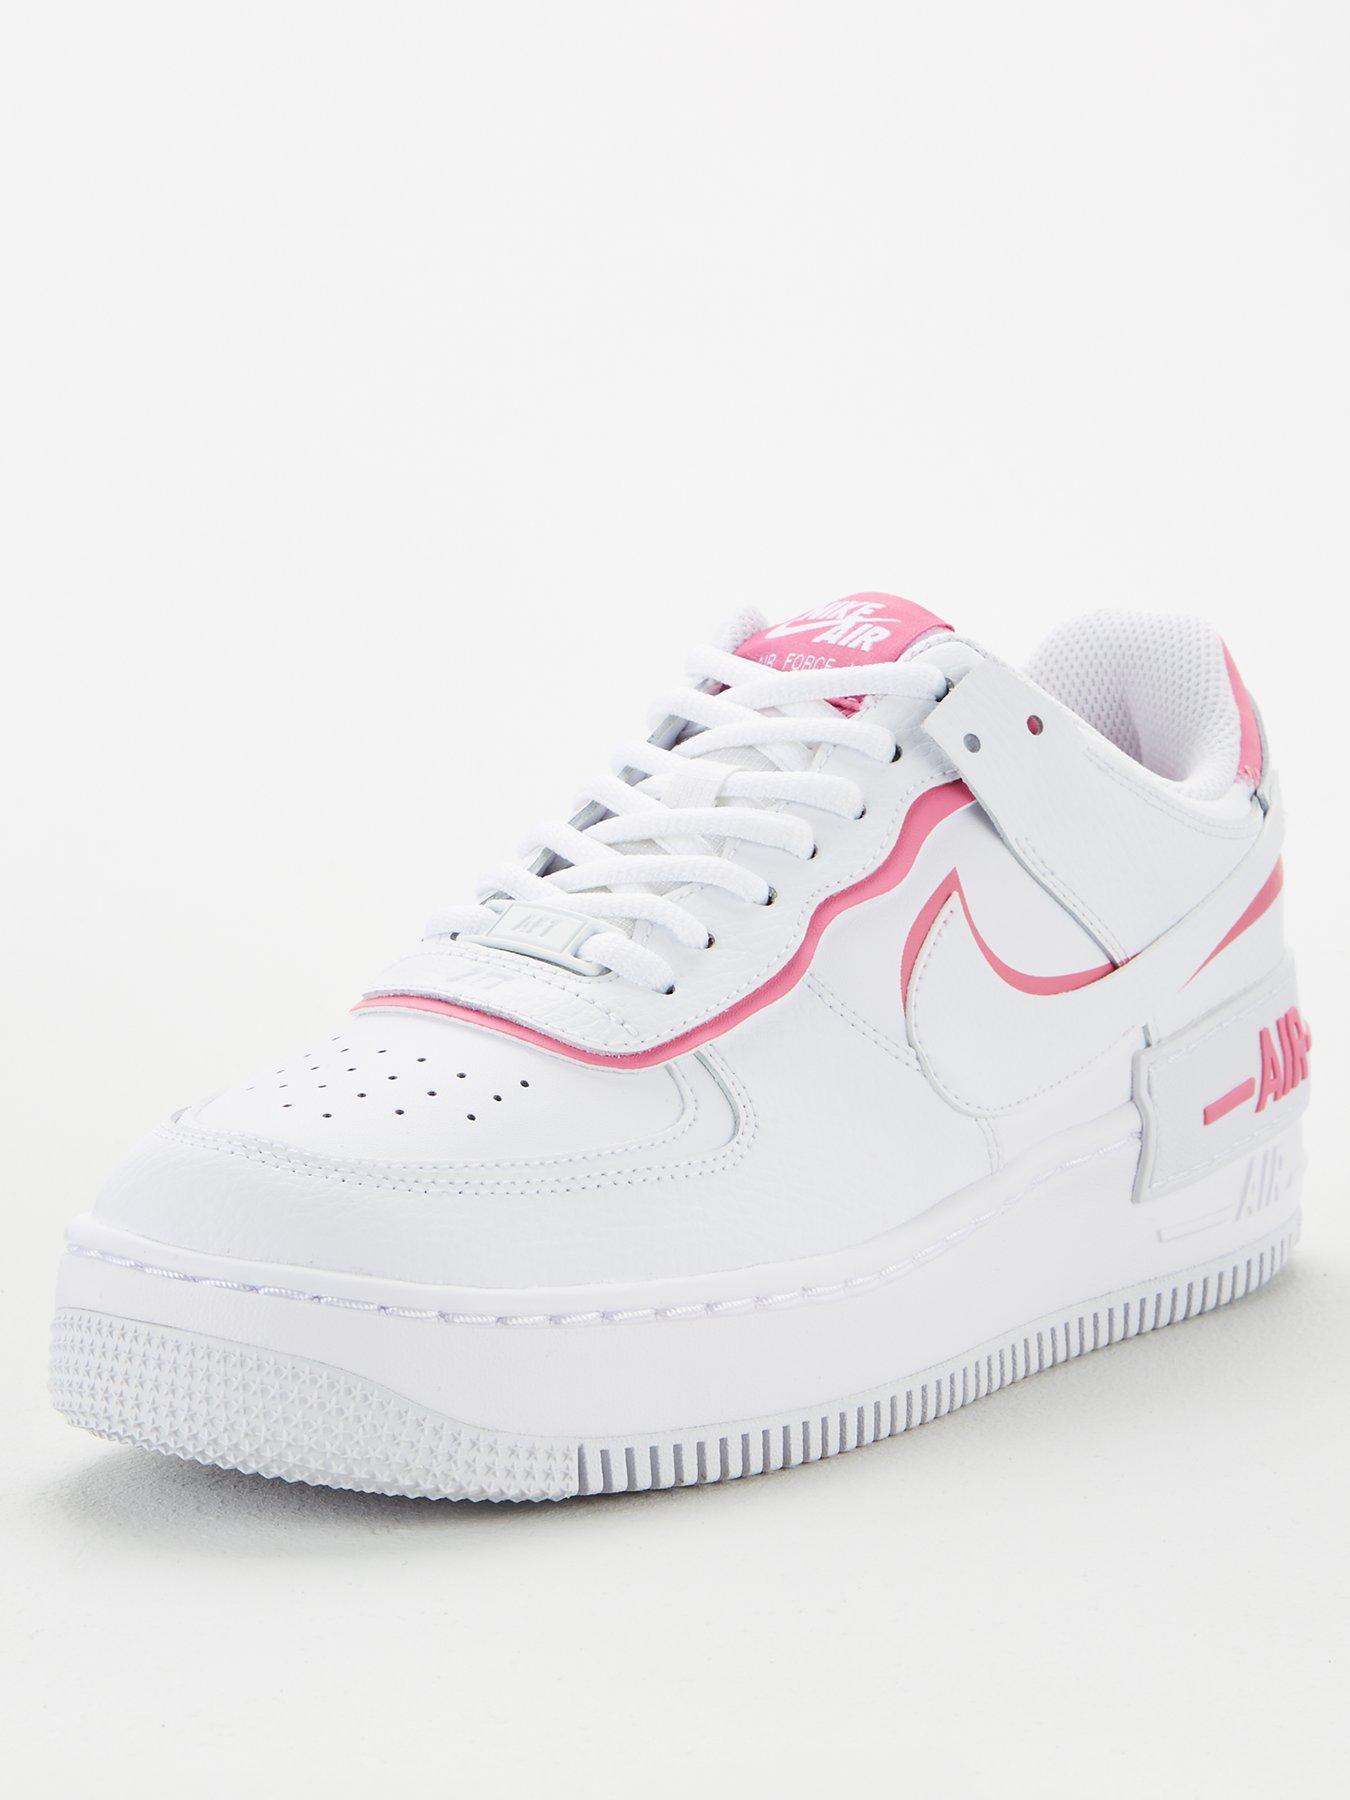 air force one shadow white and pink